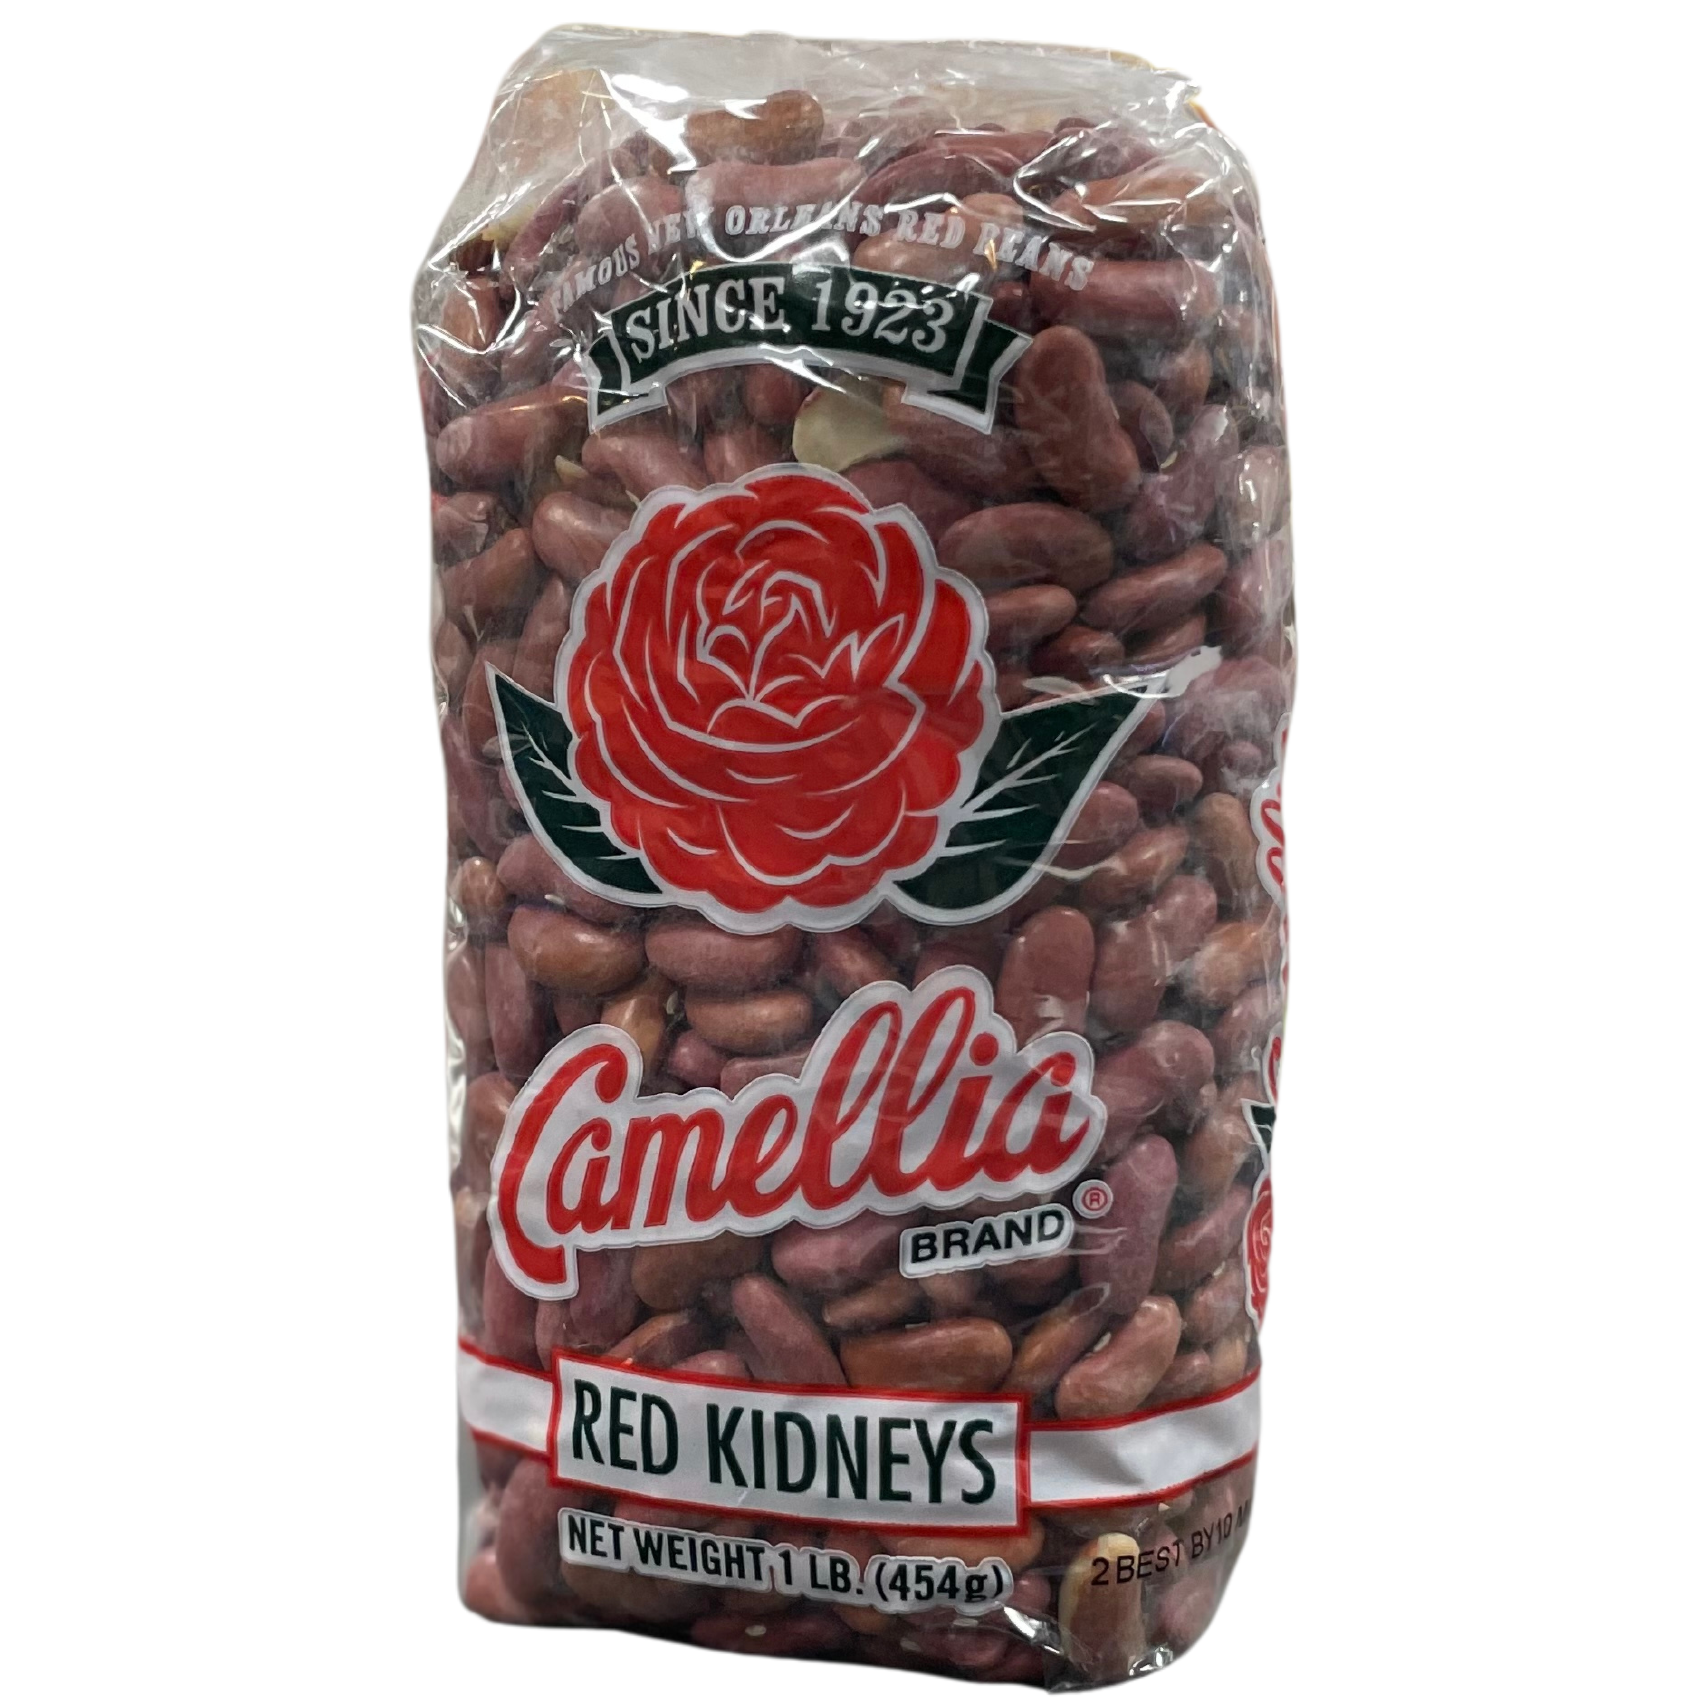 Camellia Red Kidney Beans